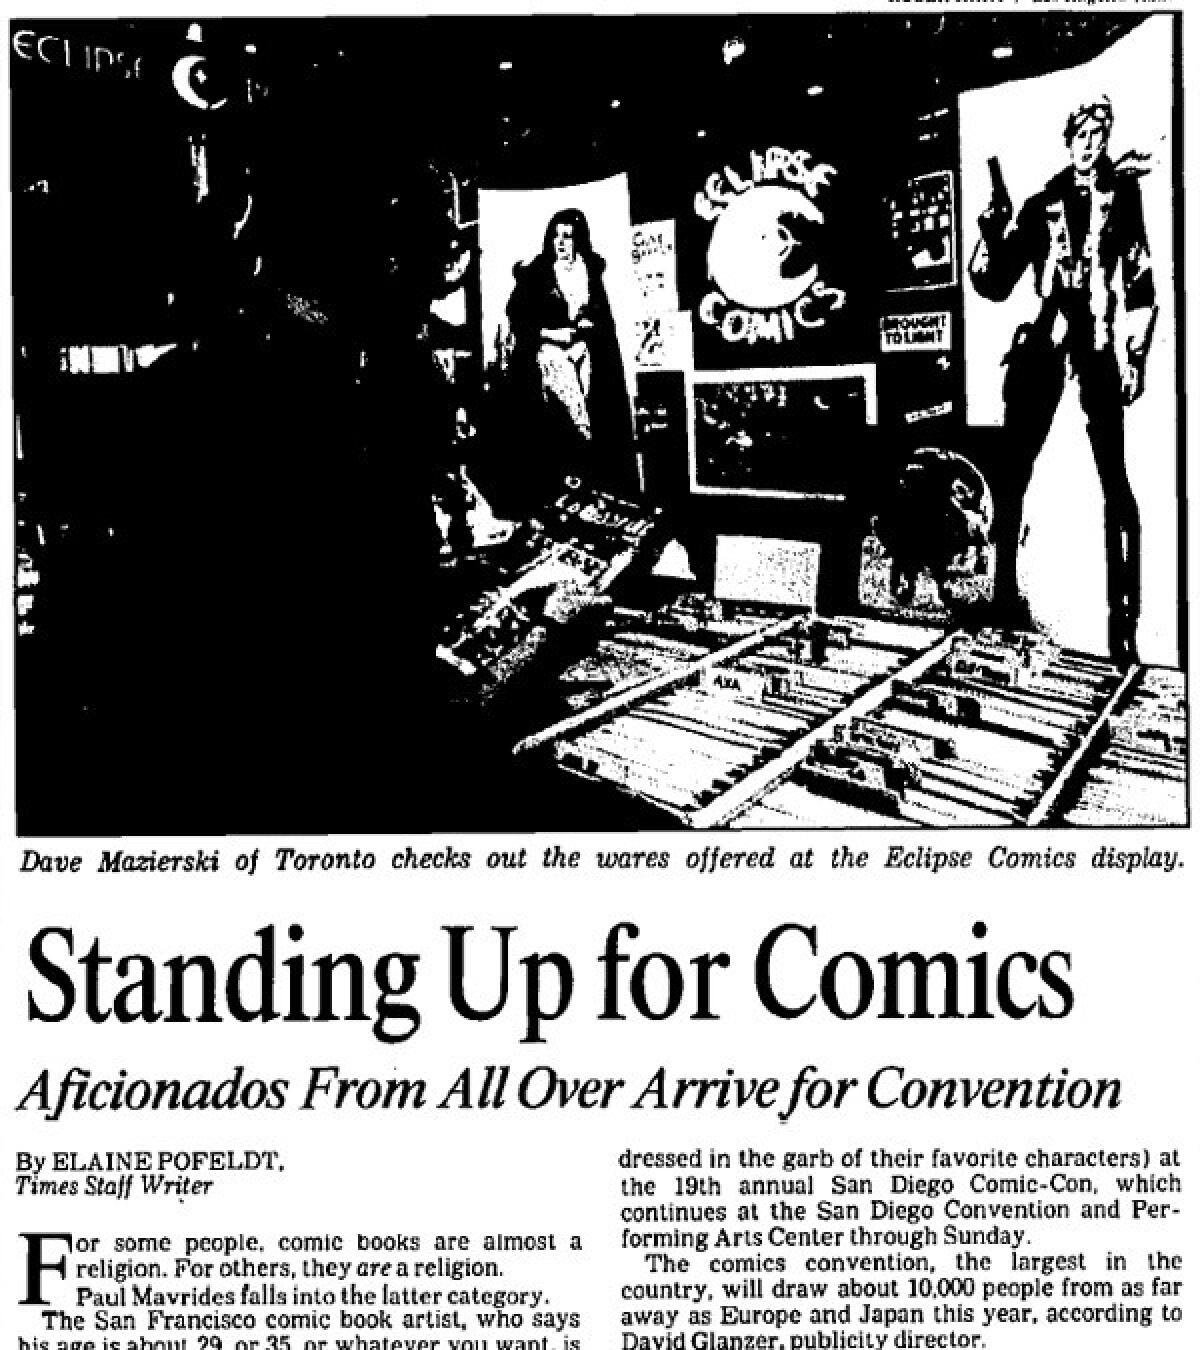 In this article, writer Elaine Pofeldt says that for some people, comic books are almost a religion. For others, they are a religion. Published: Aug 6, 1988.